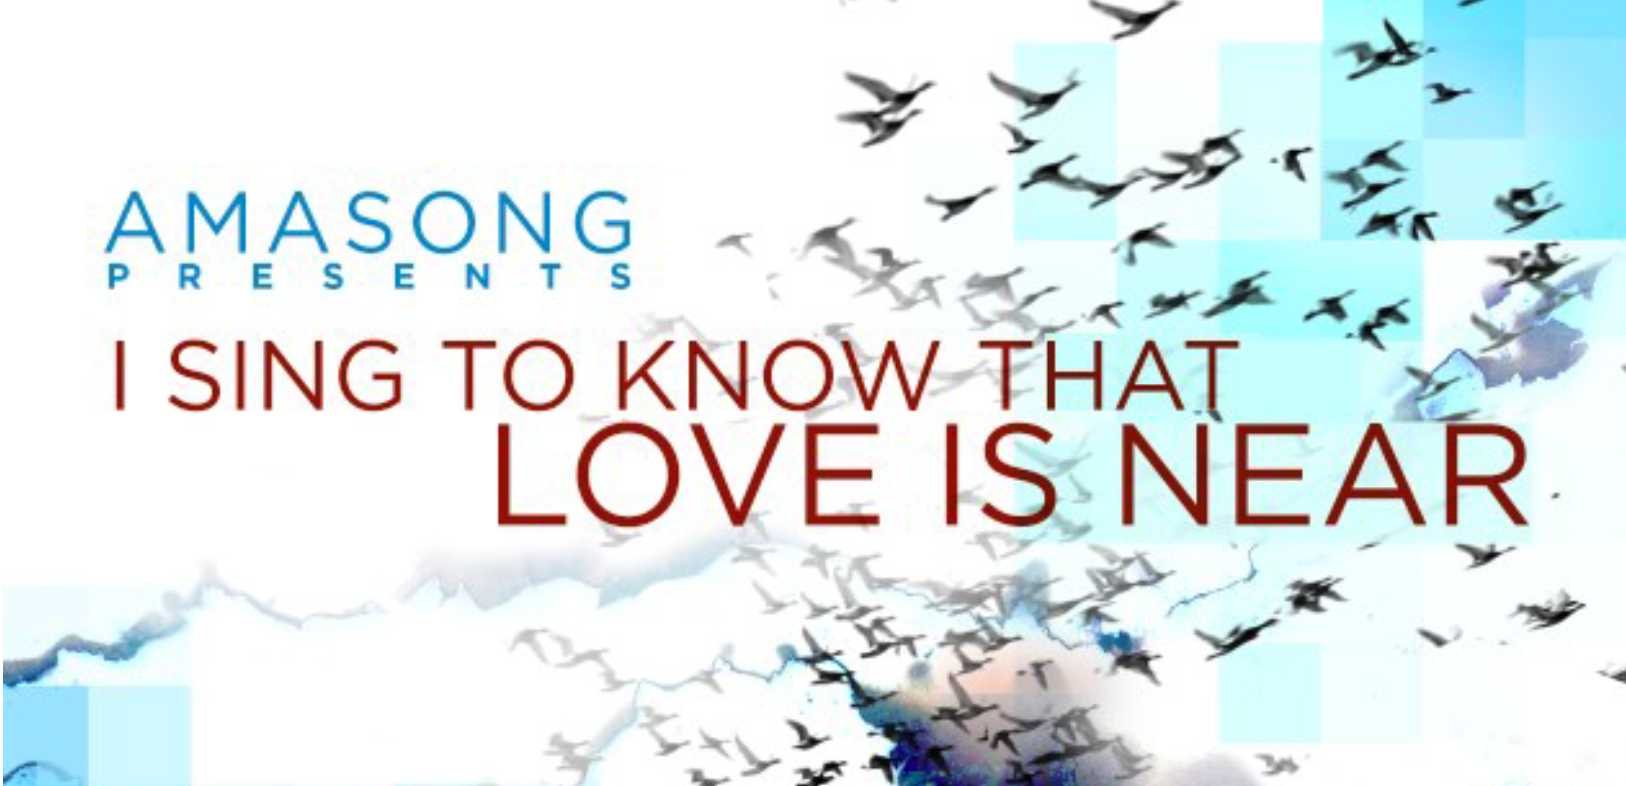 Amasong banner image for current concert theme. The concert theme is "I Sing To Know That Love is Near" and is a abstract blue, grey and white background with bird designs in the upper right corner and text describing the concert theme.